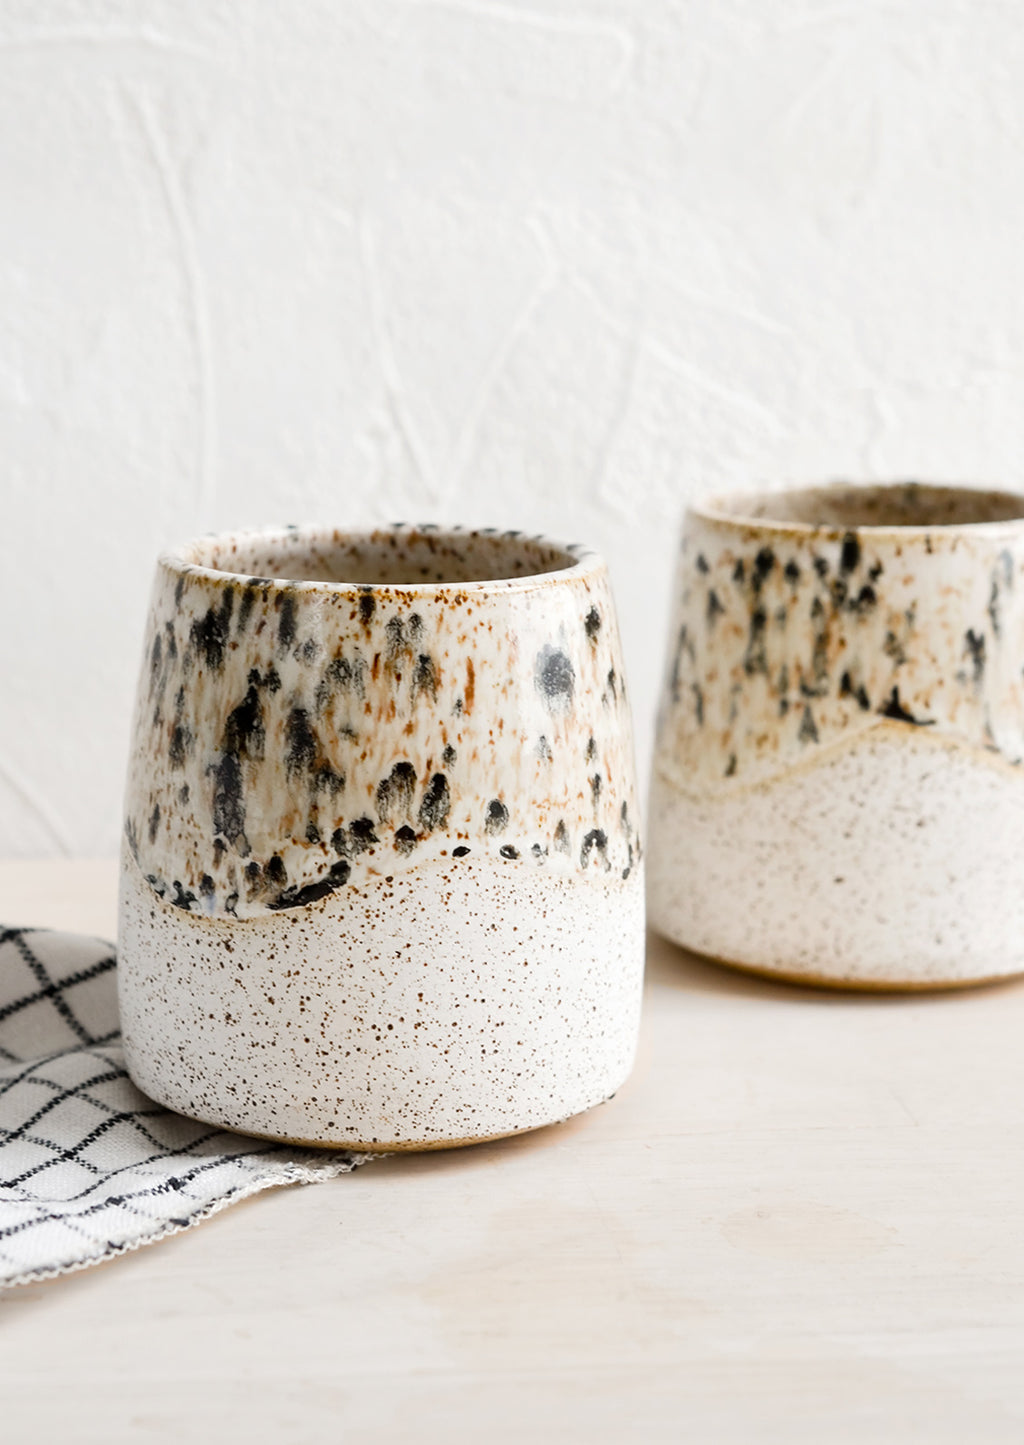 2: White speckled ceramic cups with mottled glaze detail.